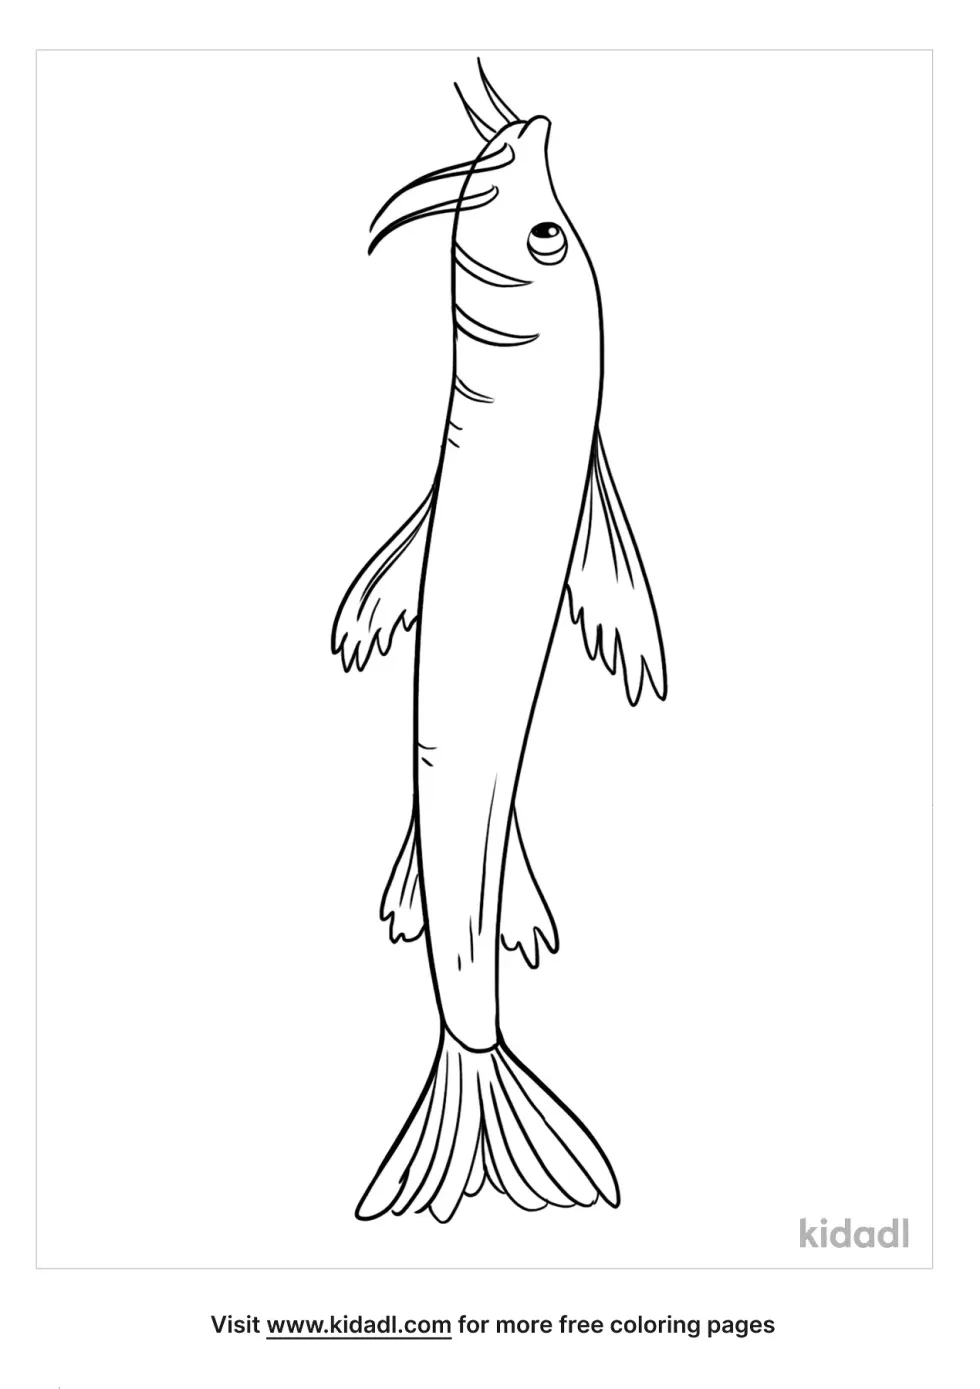 Catfish Coloring Page